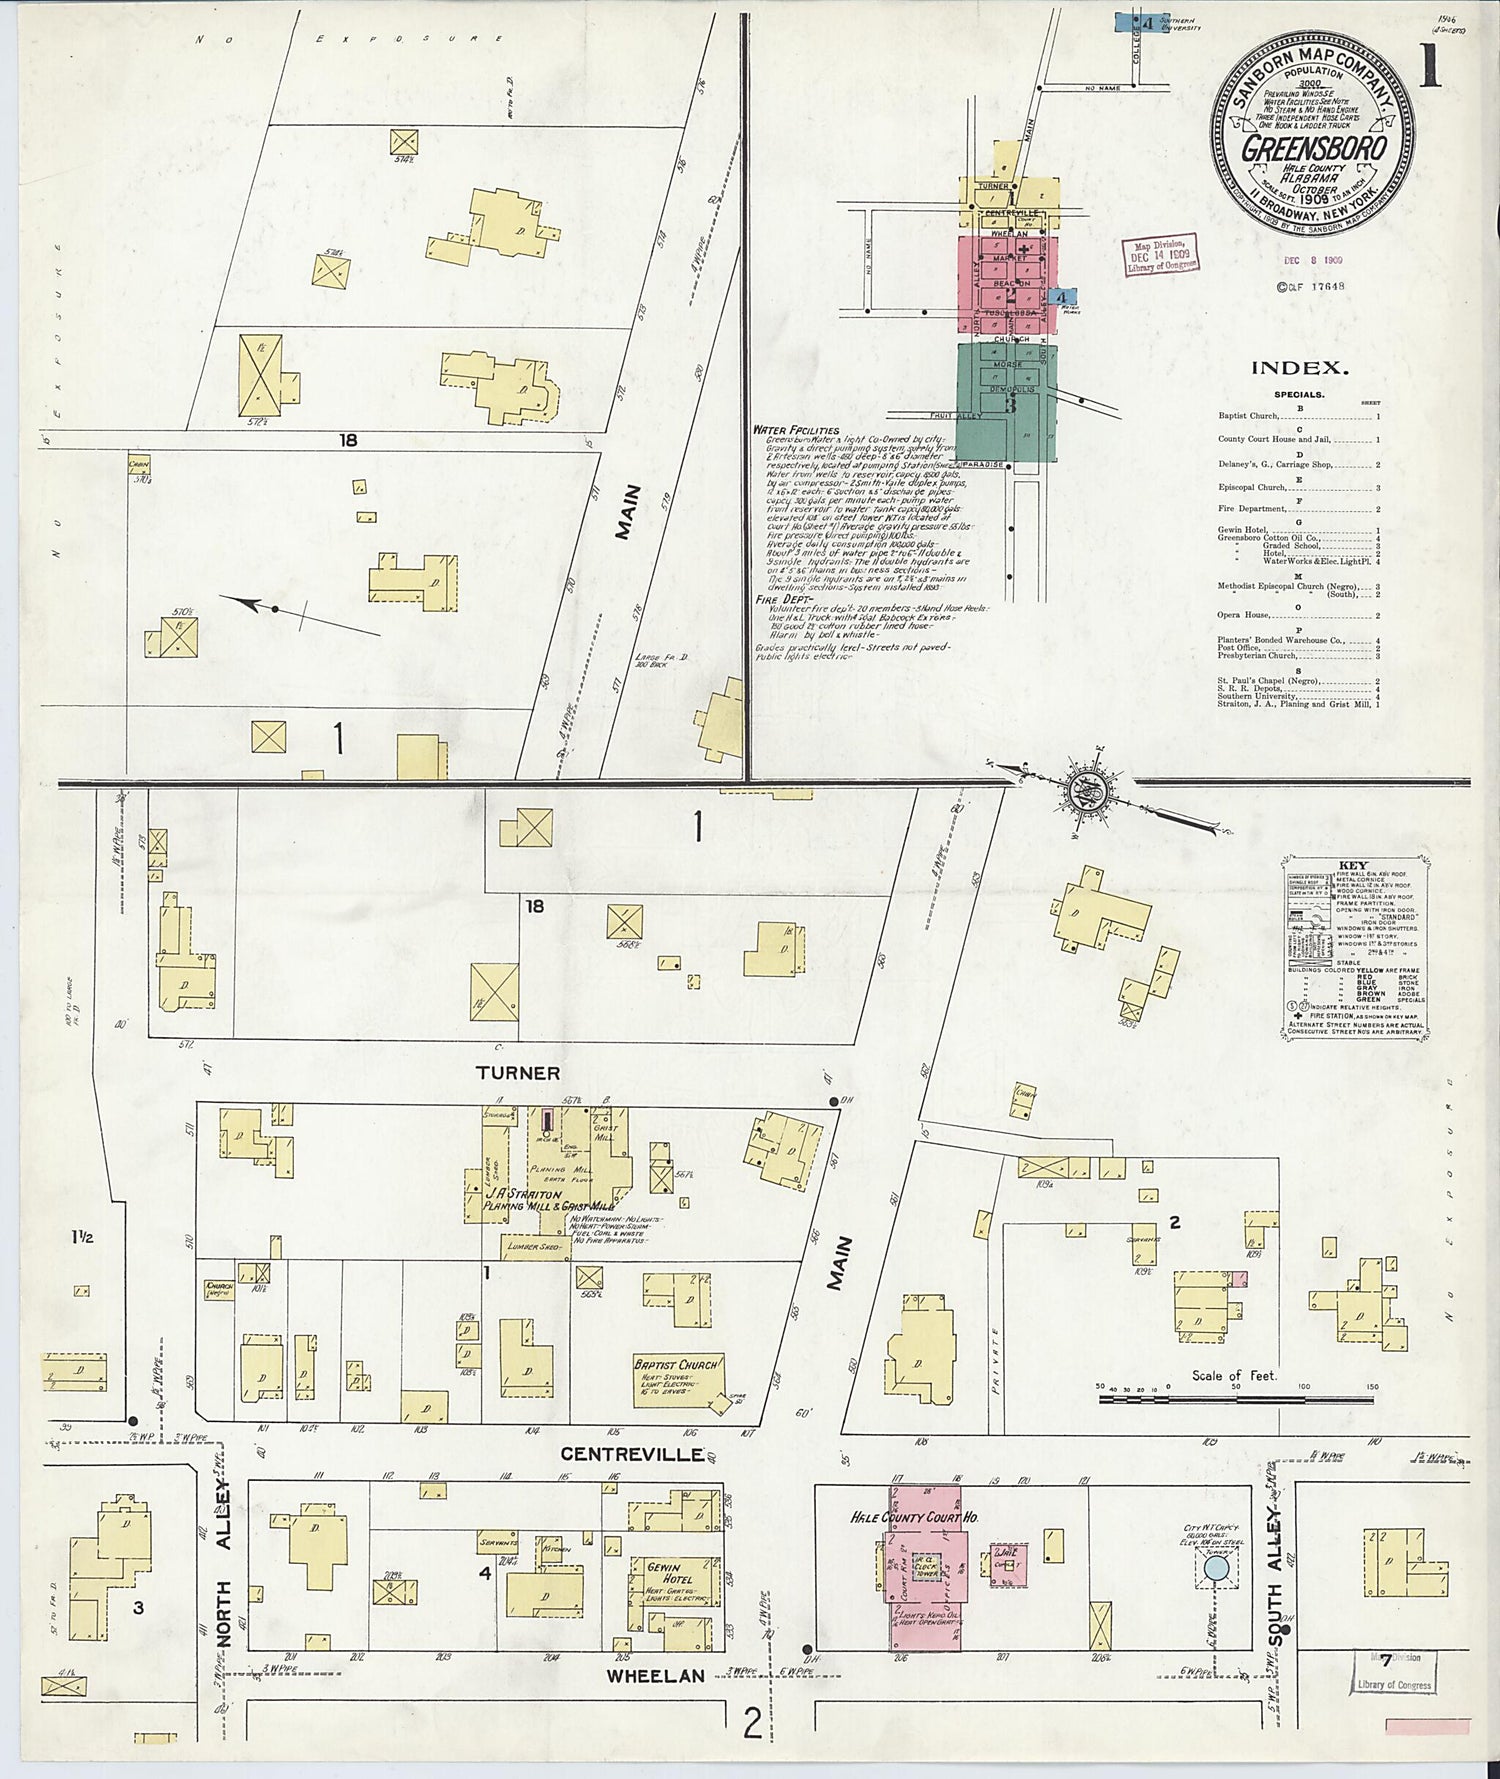 This old map of Greensboro, Hale County, Alabama was created by Sanborn Map Company in 1909